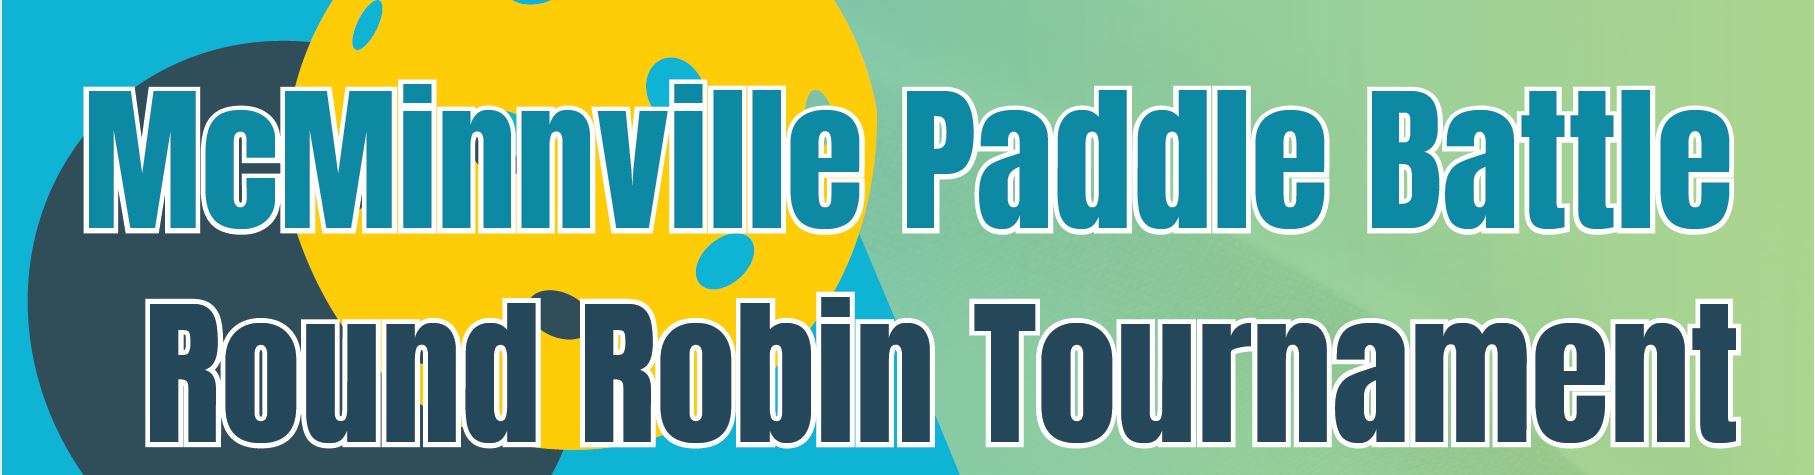 McMinnville Paddle Battle Round Robin Tournament